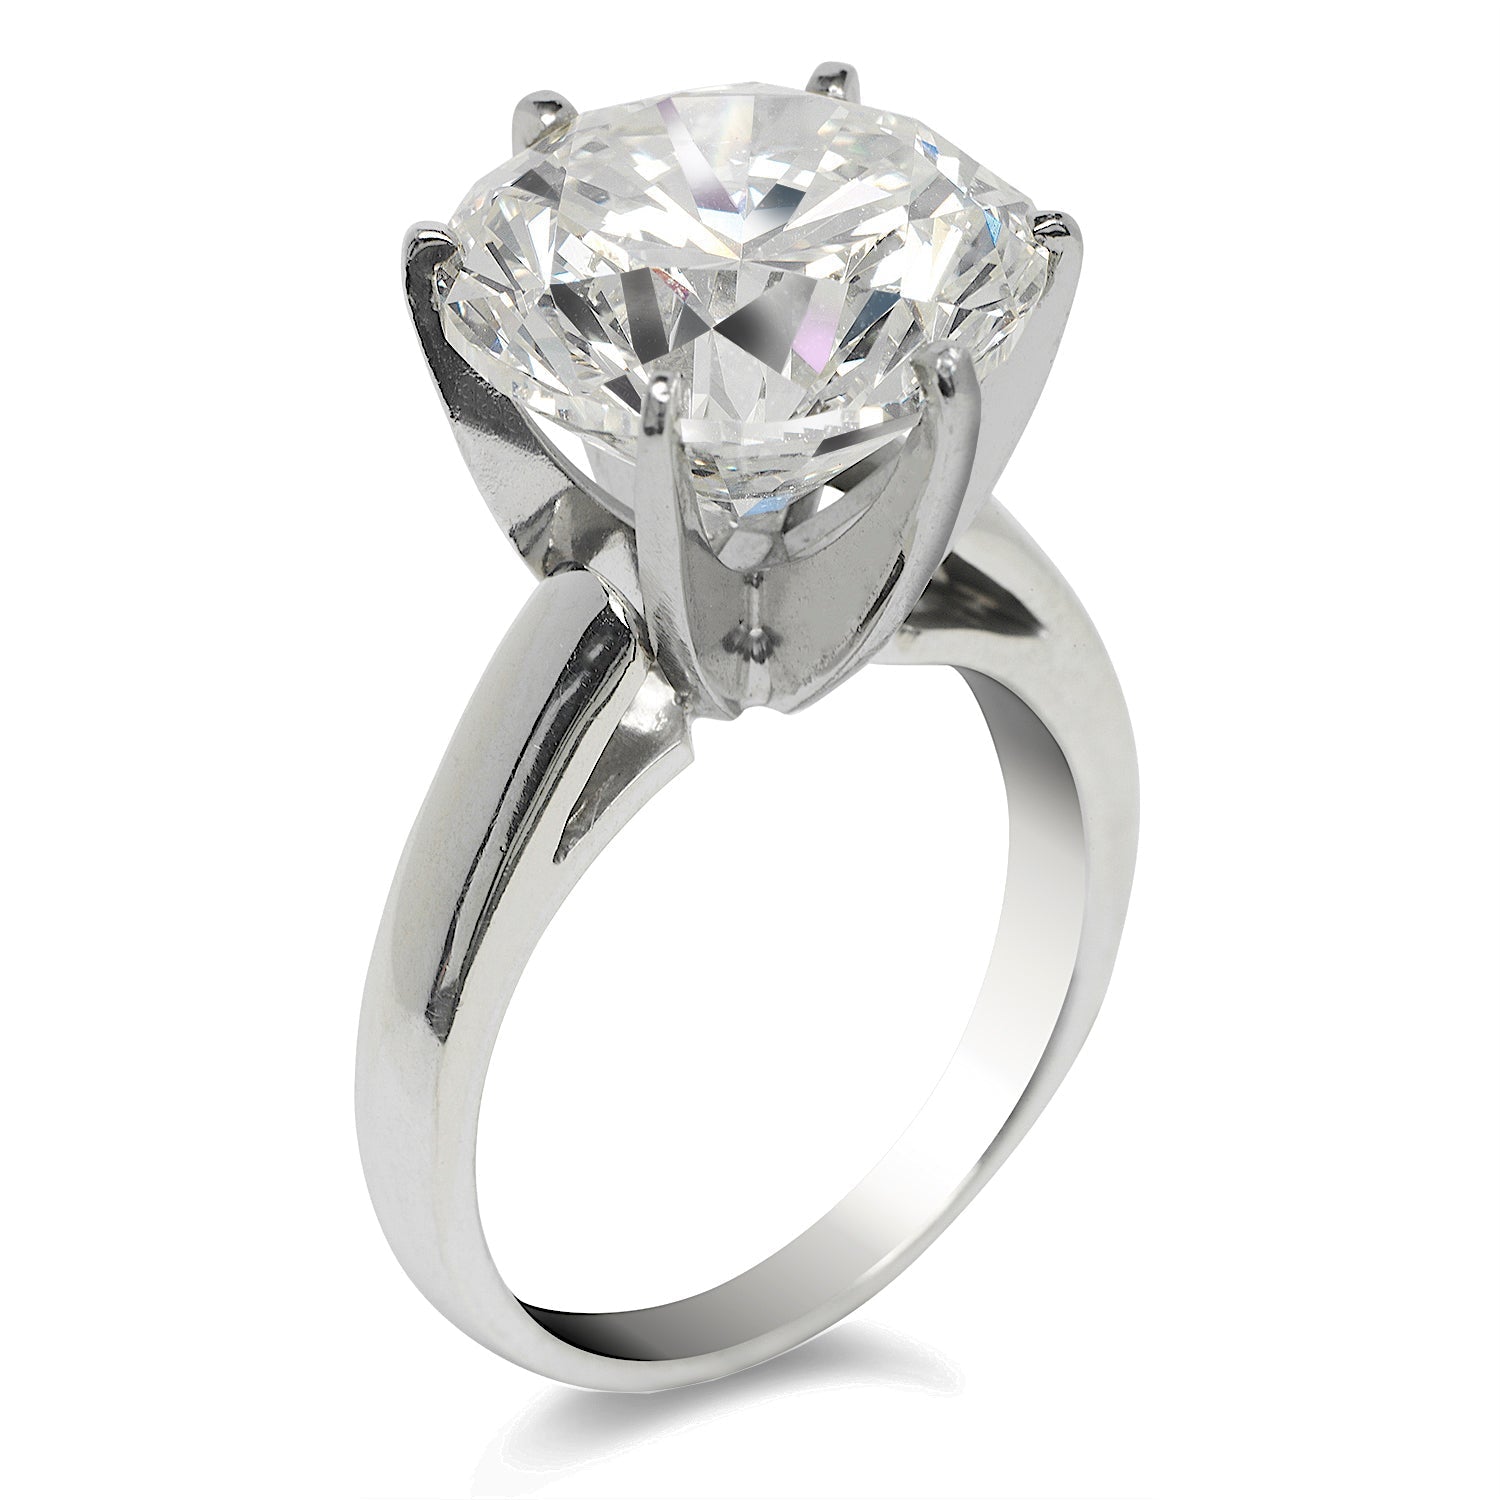 Diamond Ring Round Cut 10 Carat Solitaire Ring in 14K White Gold Side View